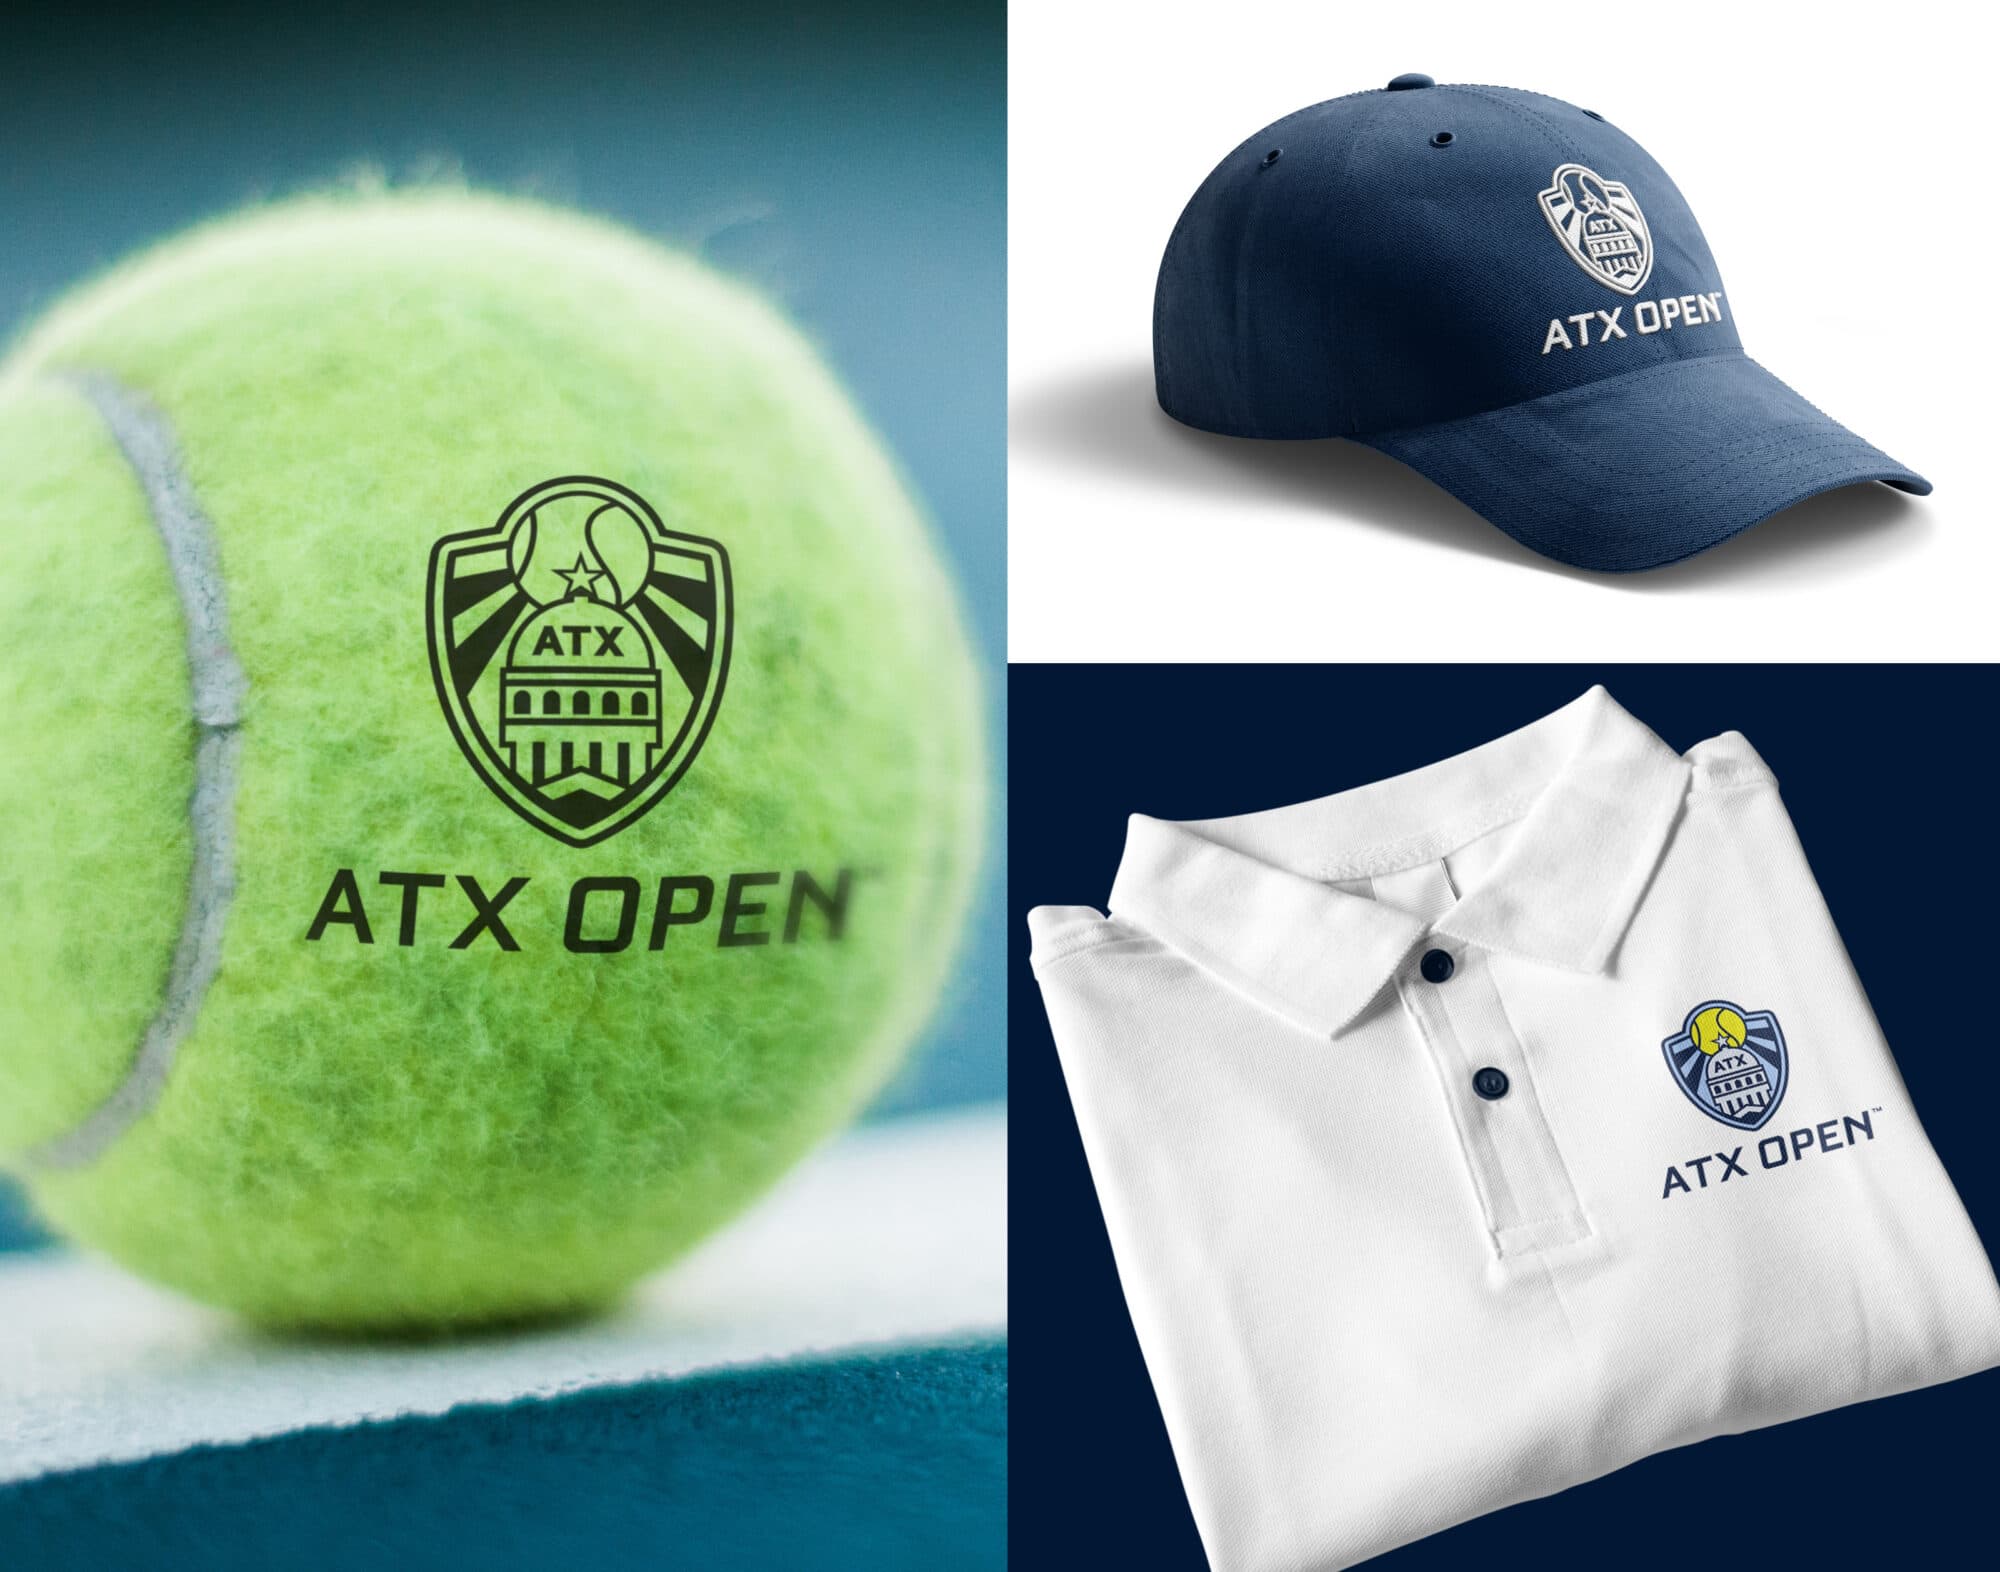 Tennis ball, baseball cap, and shirt all branded with ATX Open Logos